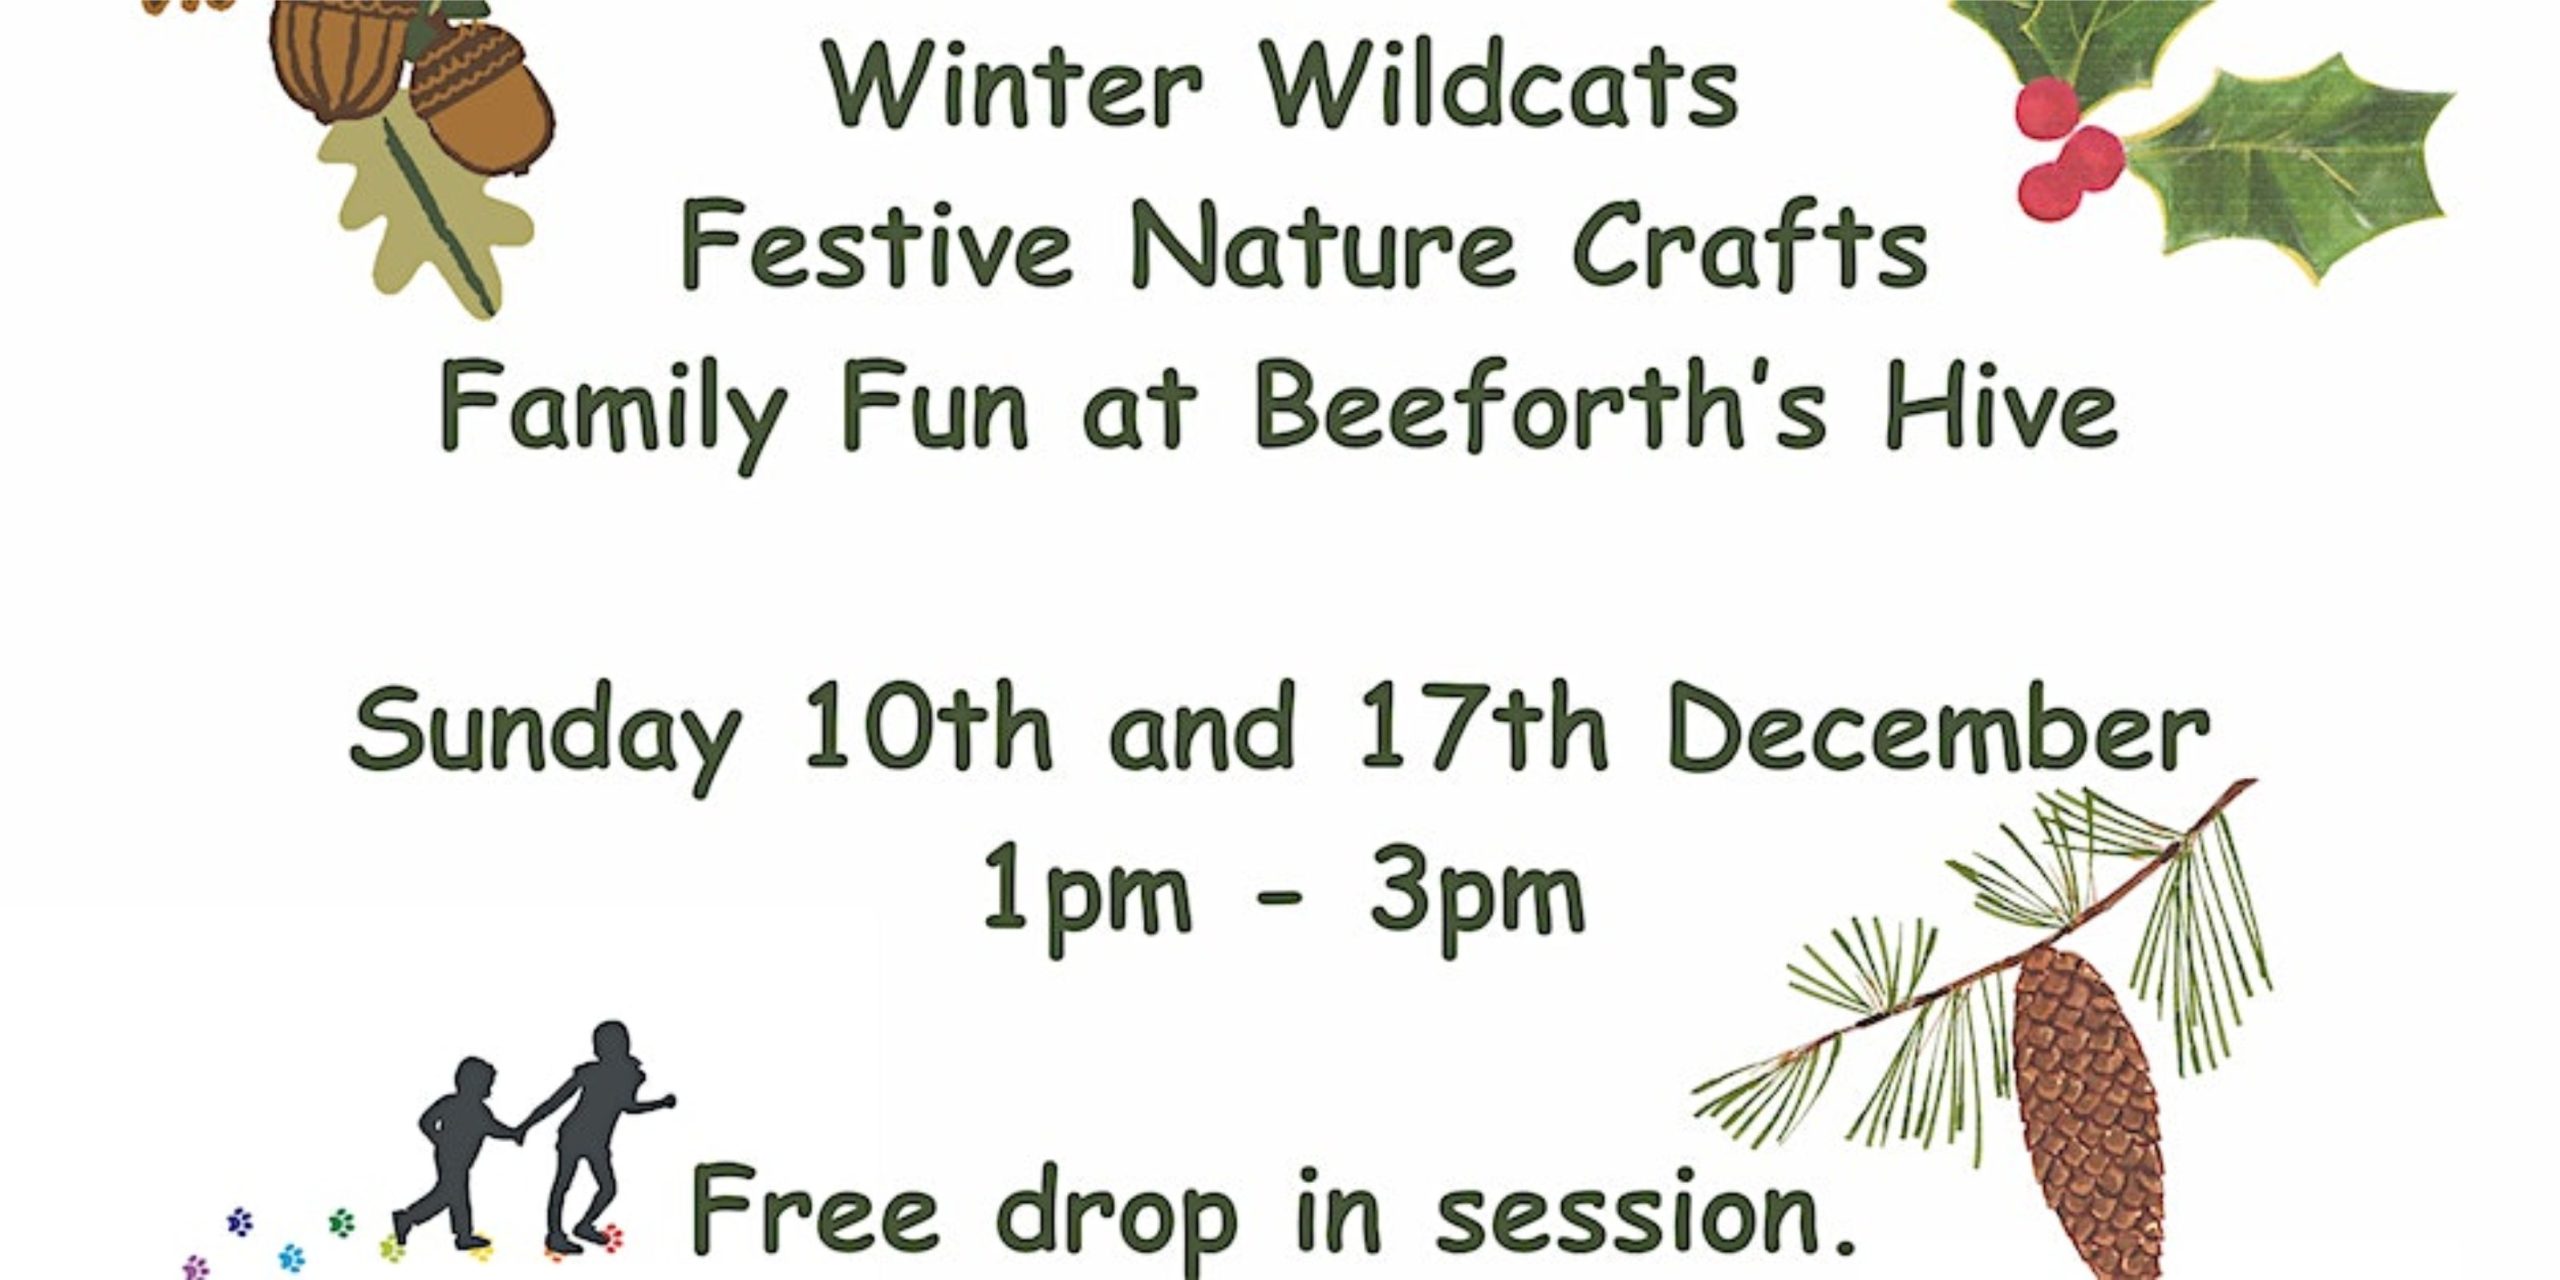 Festive Nature Crafting Fun with the Wildcats